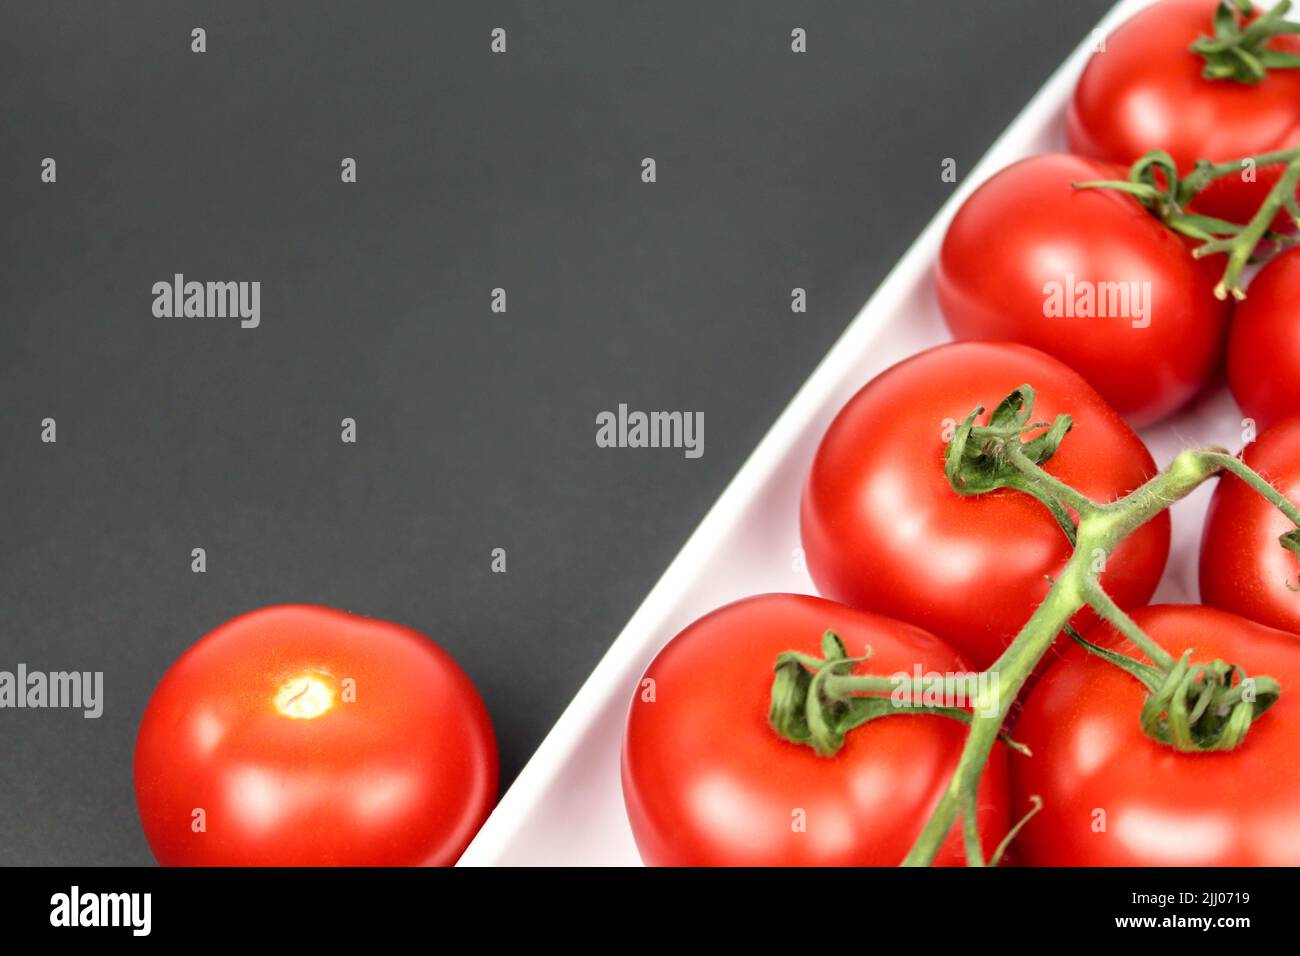 Red tomatoes on white plate on black background Stock Photo